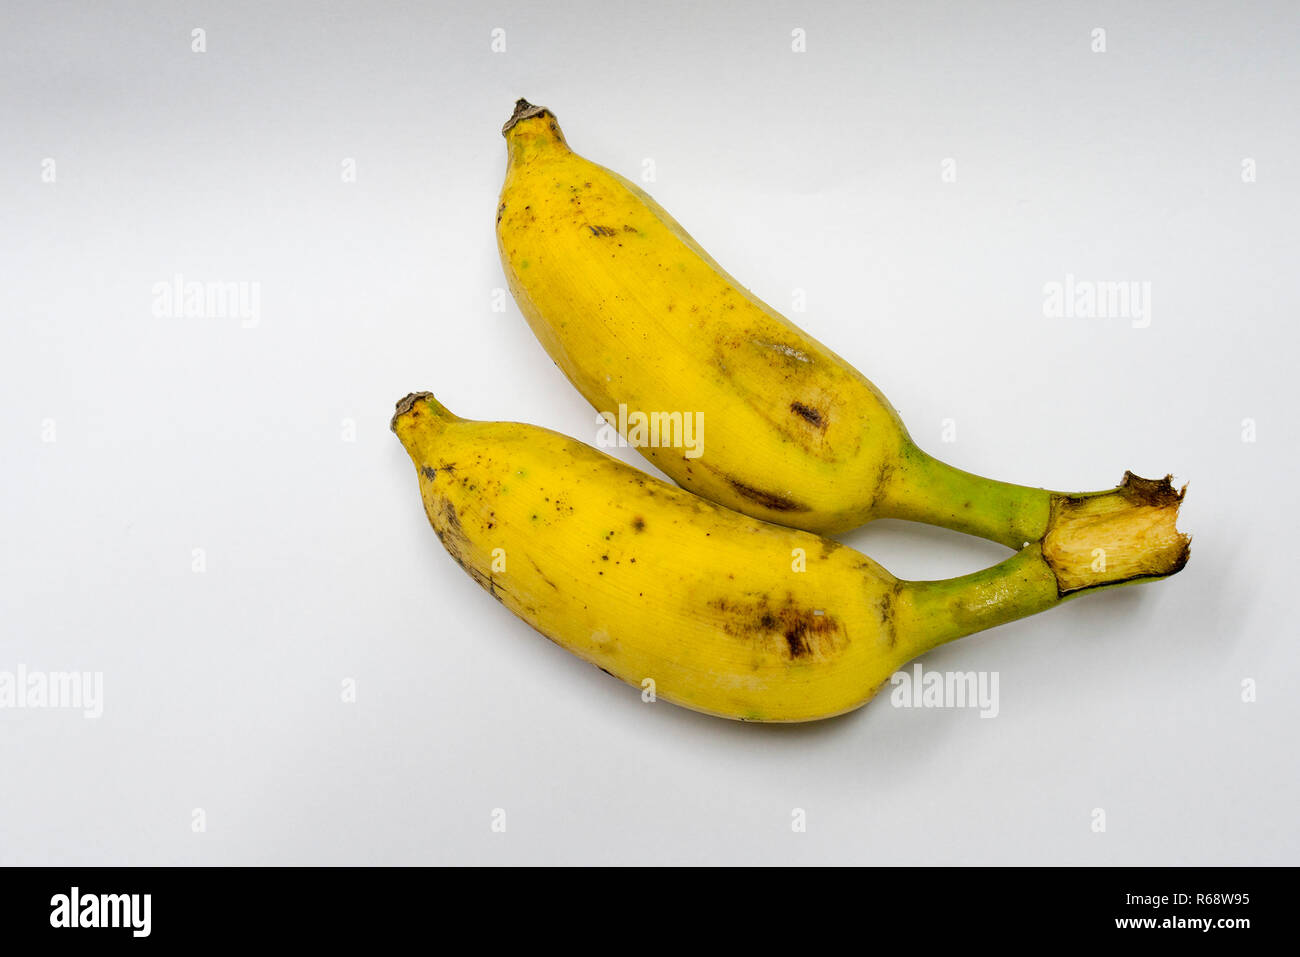 Two bananas ripened on a white background. Stock Photo